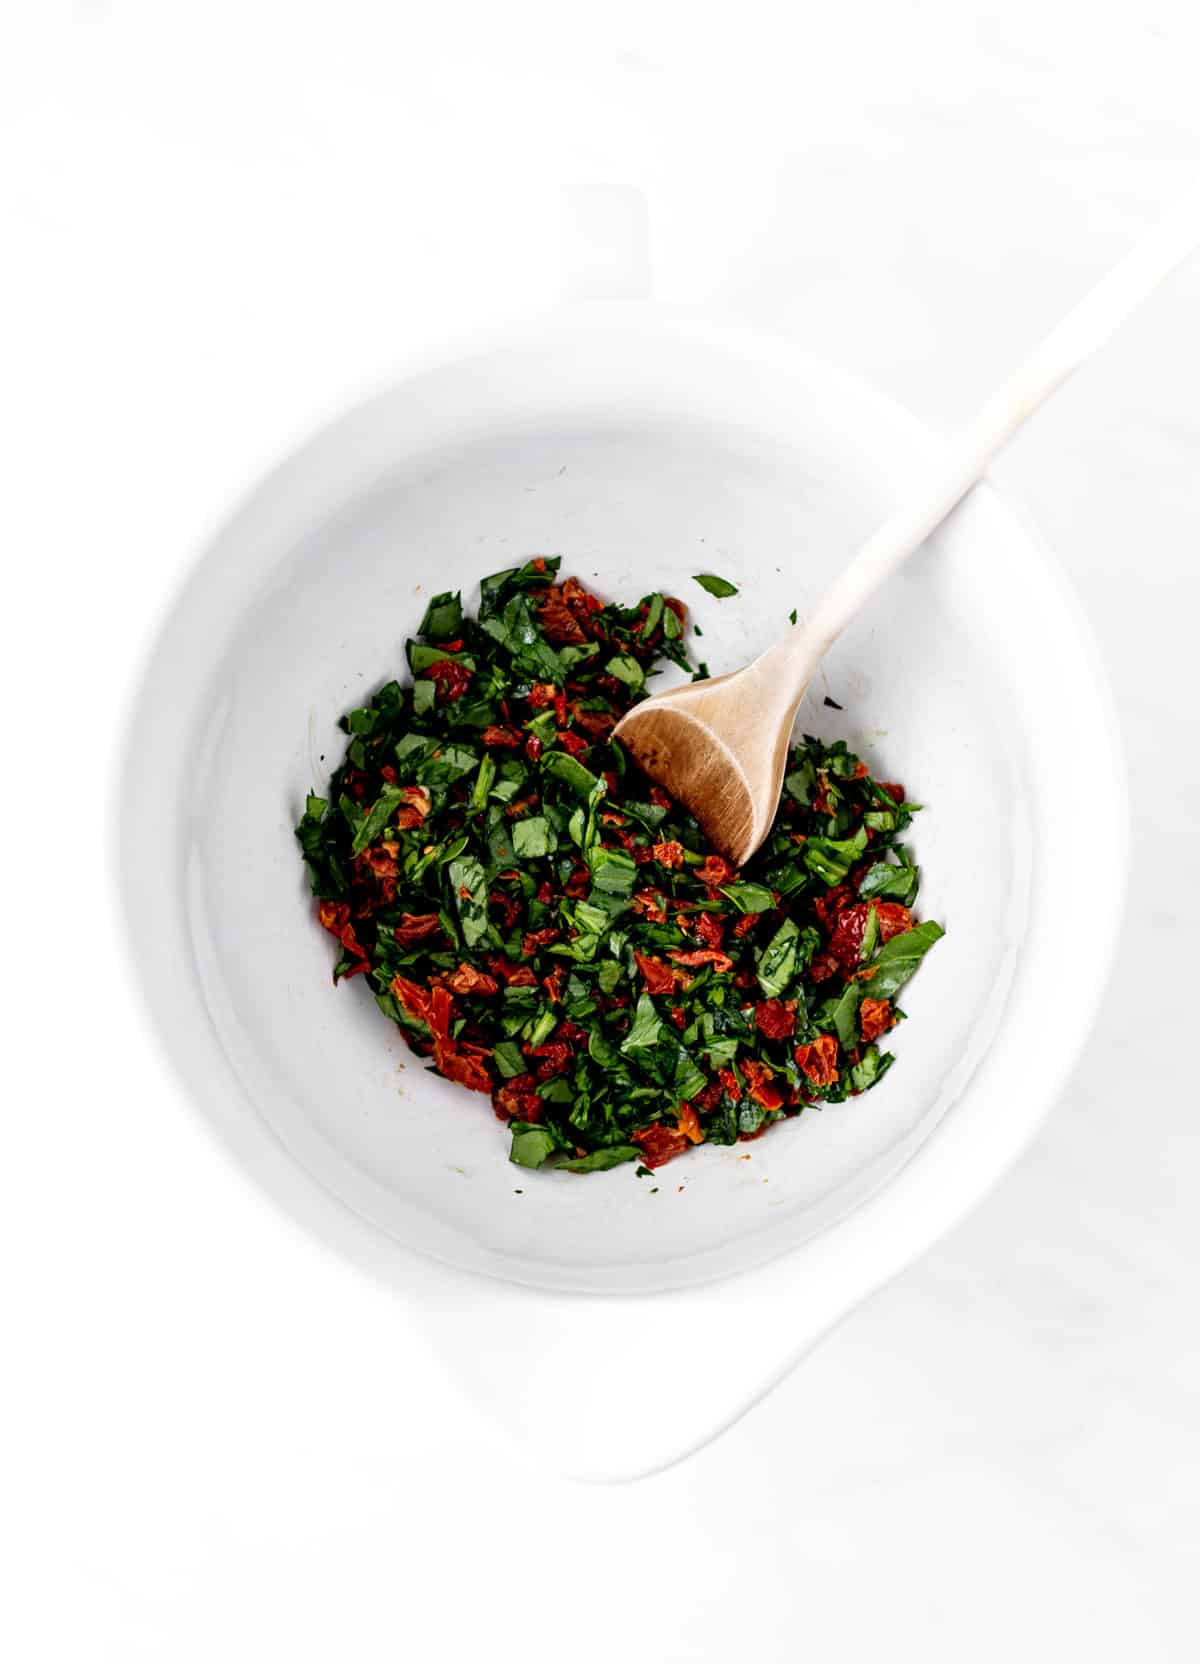 Spinach and sun-dried tomatoes being mixed together in a bowl.